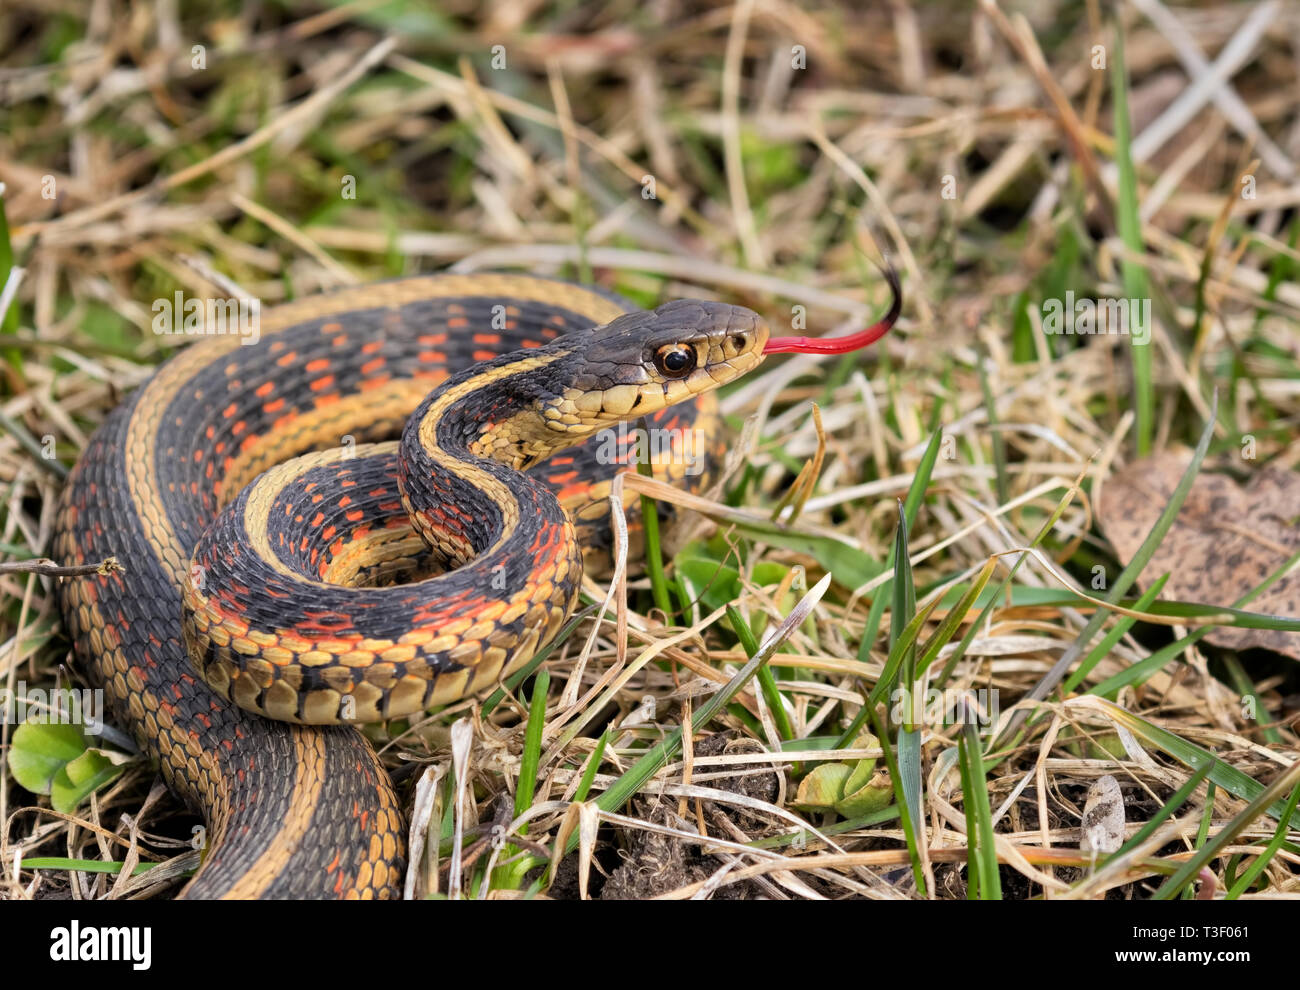 Common garter snake (Thamnophis sirtalis) at the grass near Little Wall Lake and first spring days, Iowa, USA Stock Photo